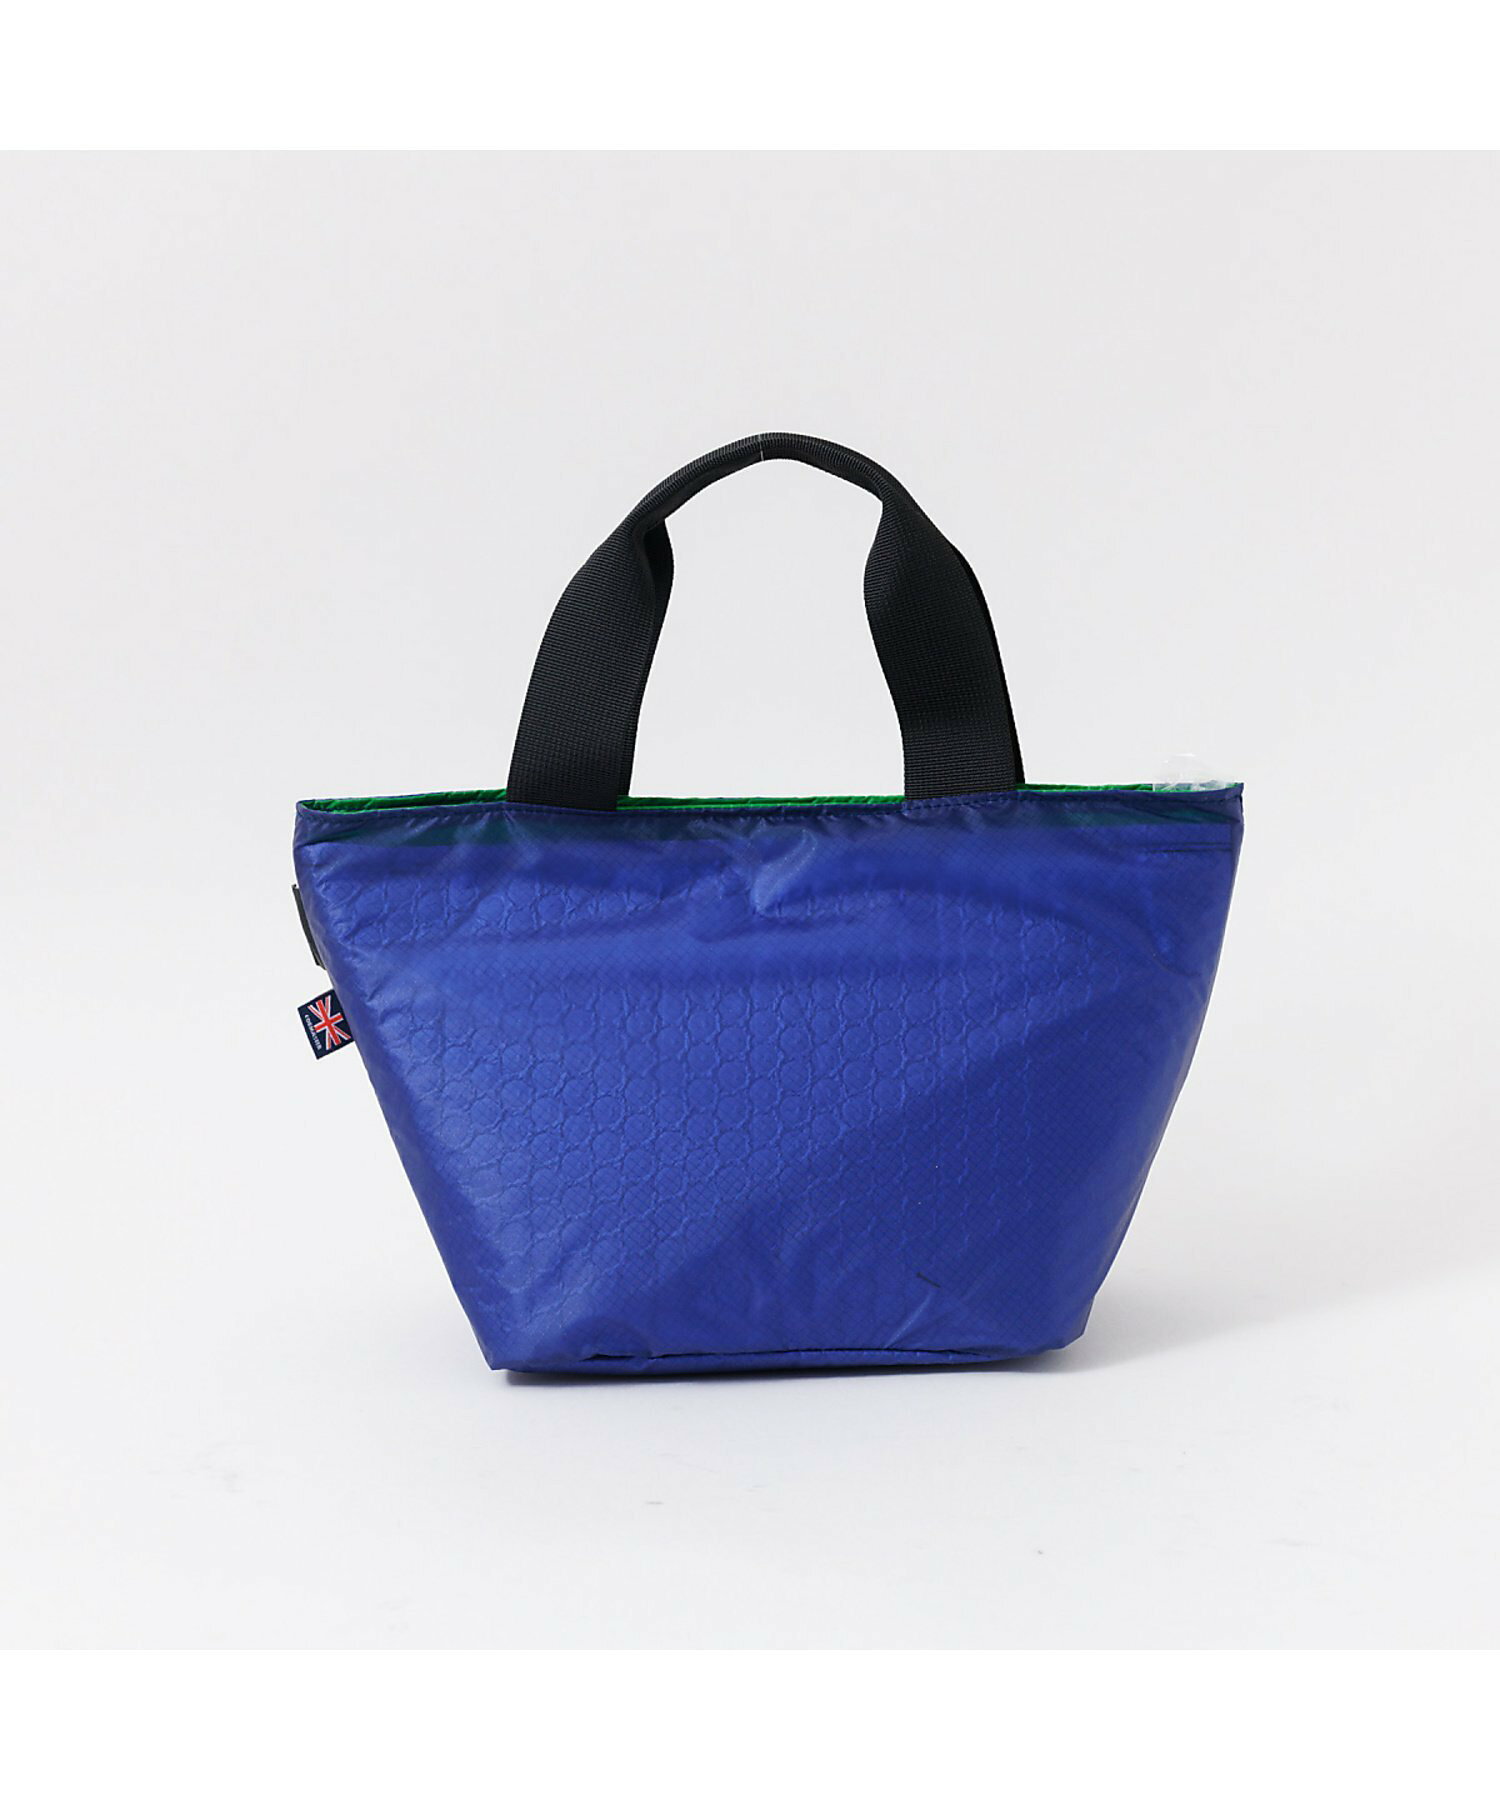 【COBMASTER/コブマスター 】LUNCH COOLER TOTE/ランチ